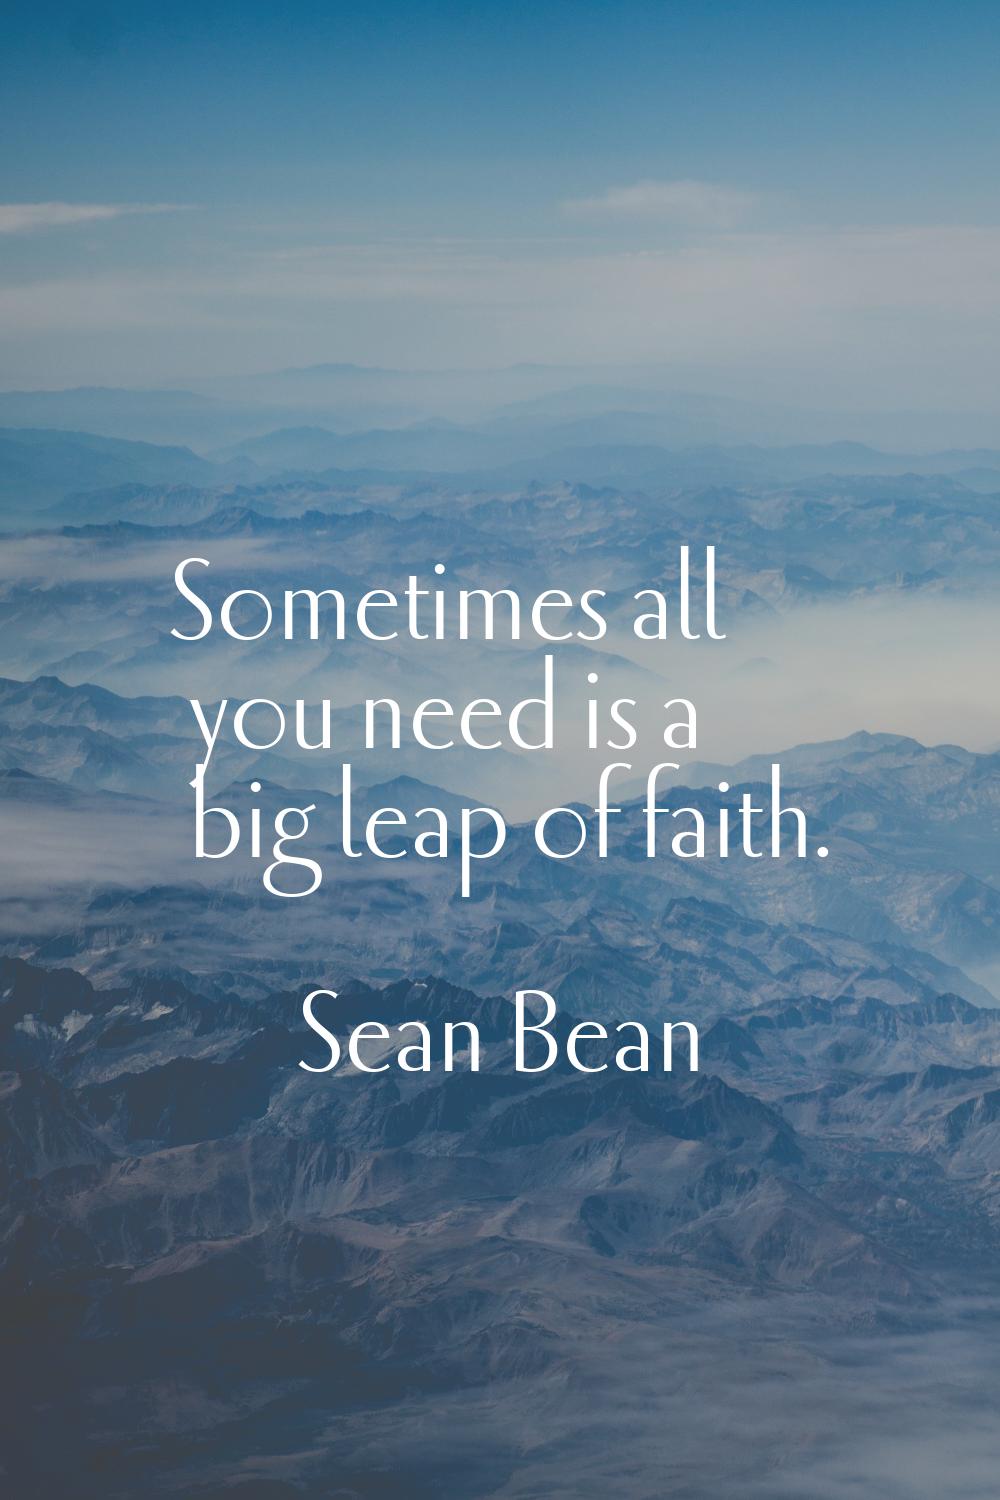 Sometimes all you need is a big leap of faith.